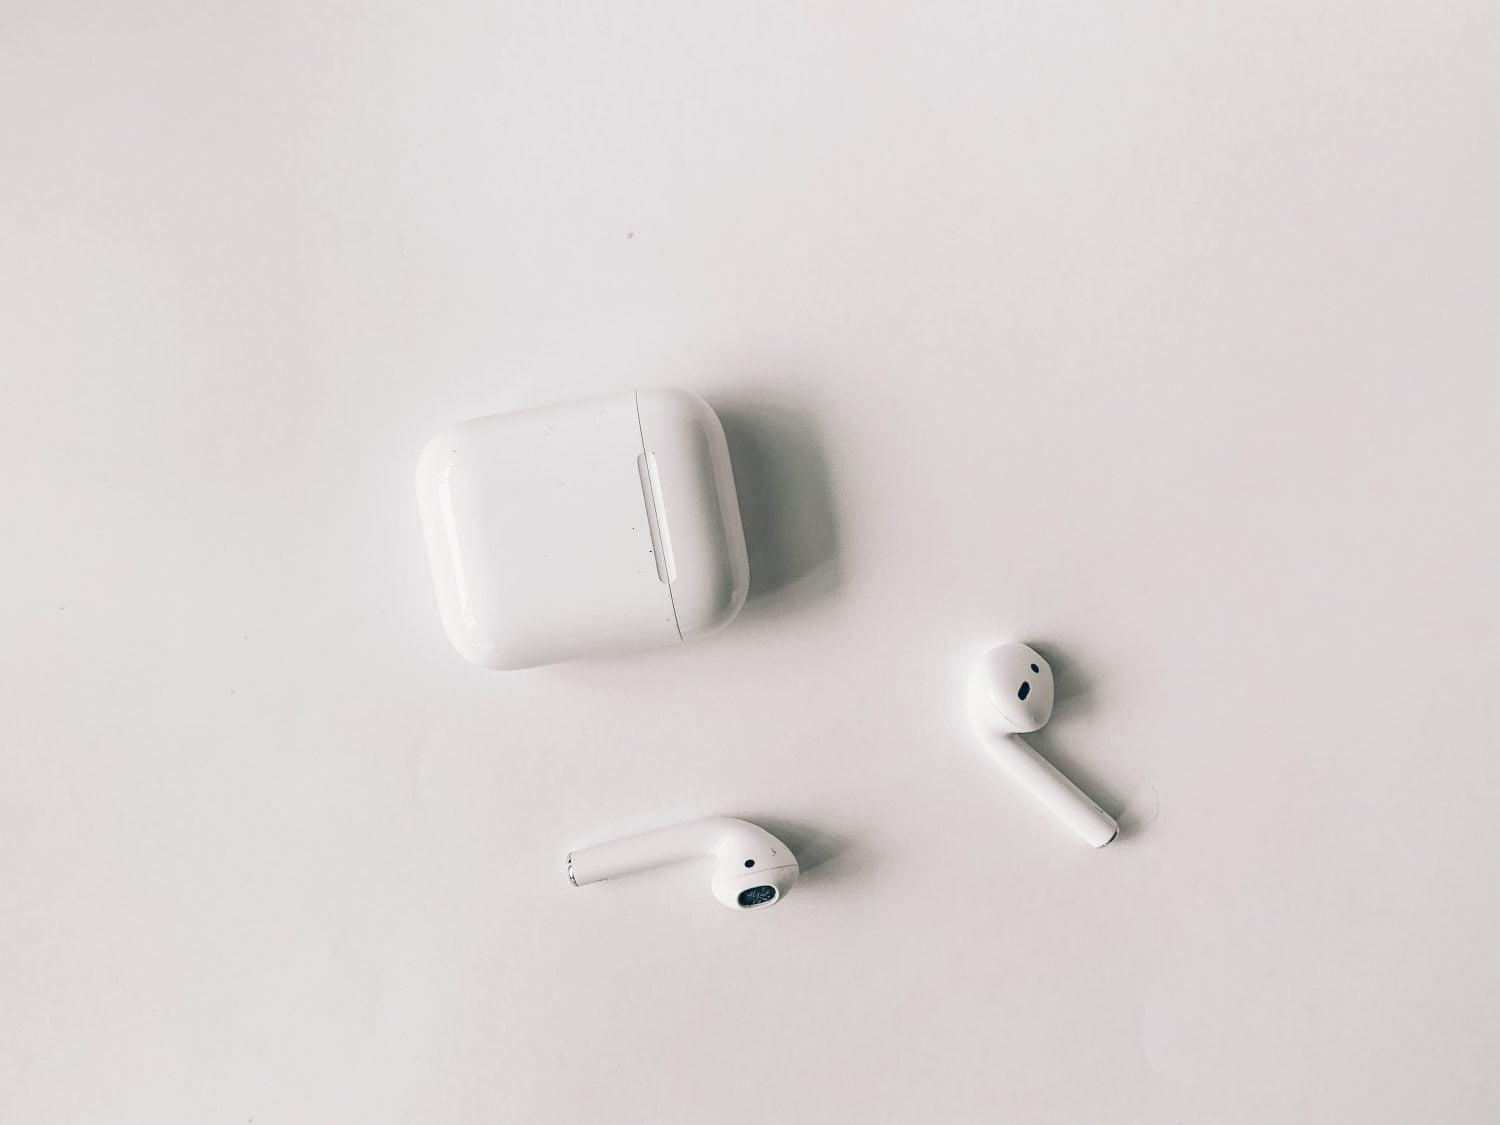 AirPods, gadgets